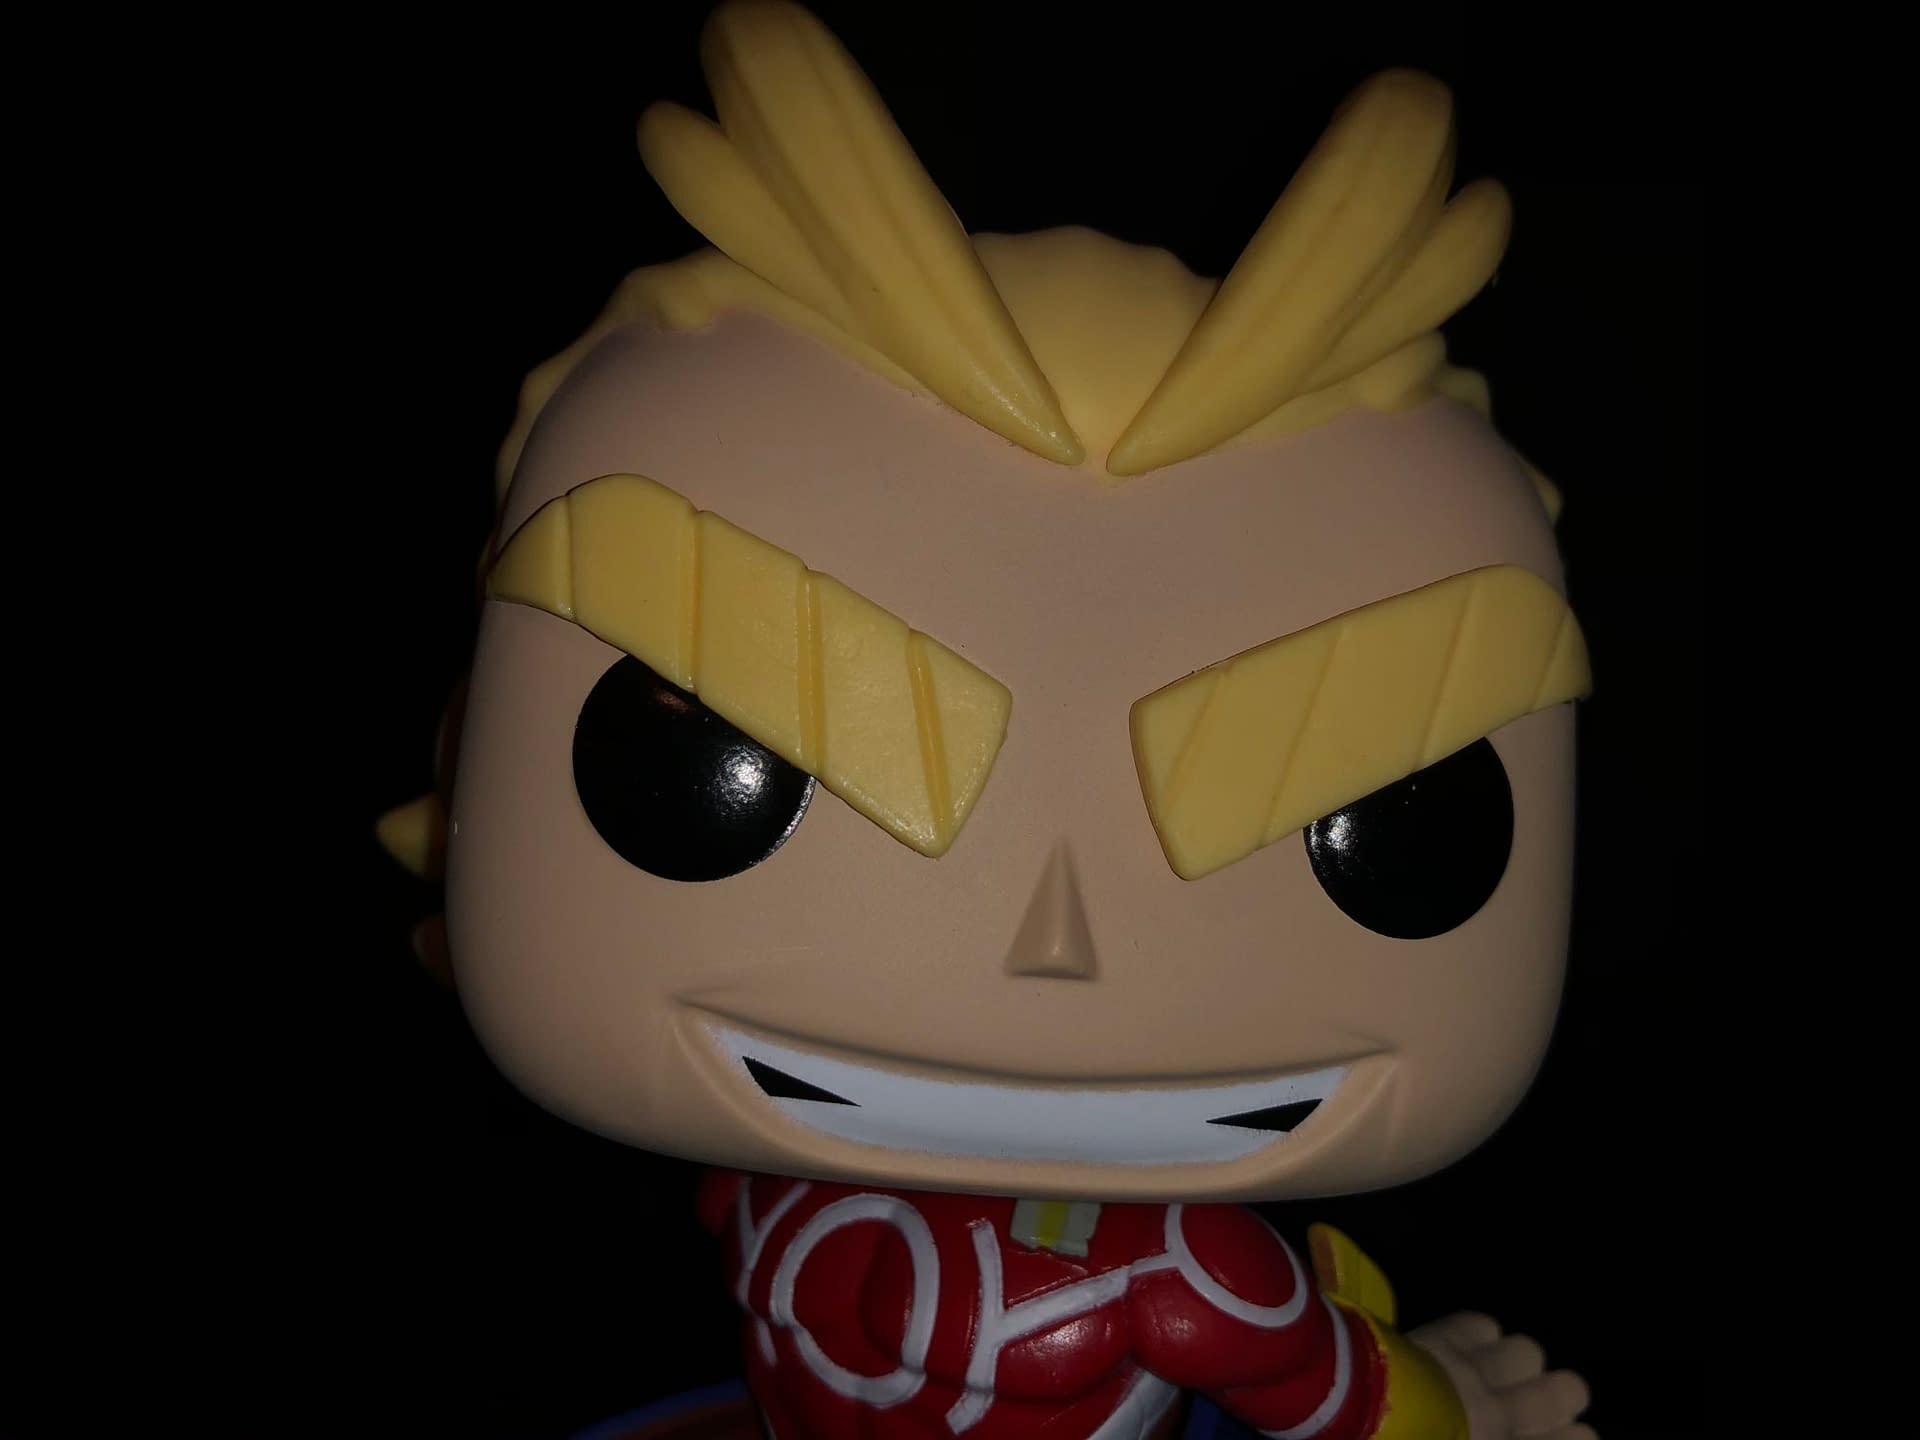 All Might Funko Pops Tell Us That They Are Here! [Review]